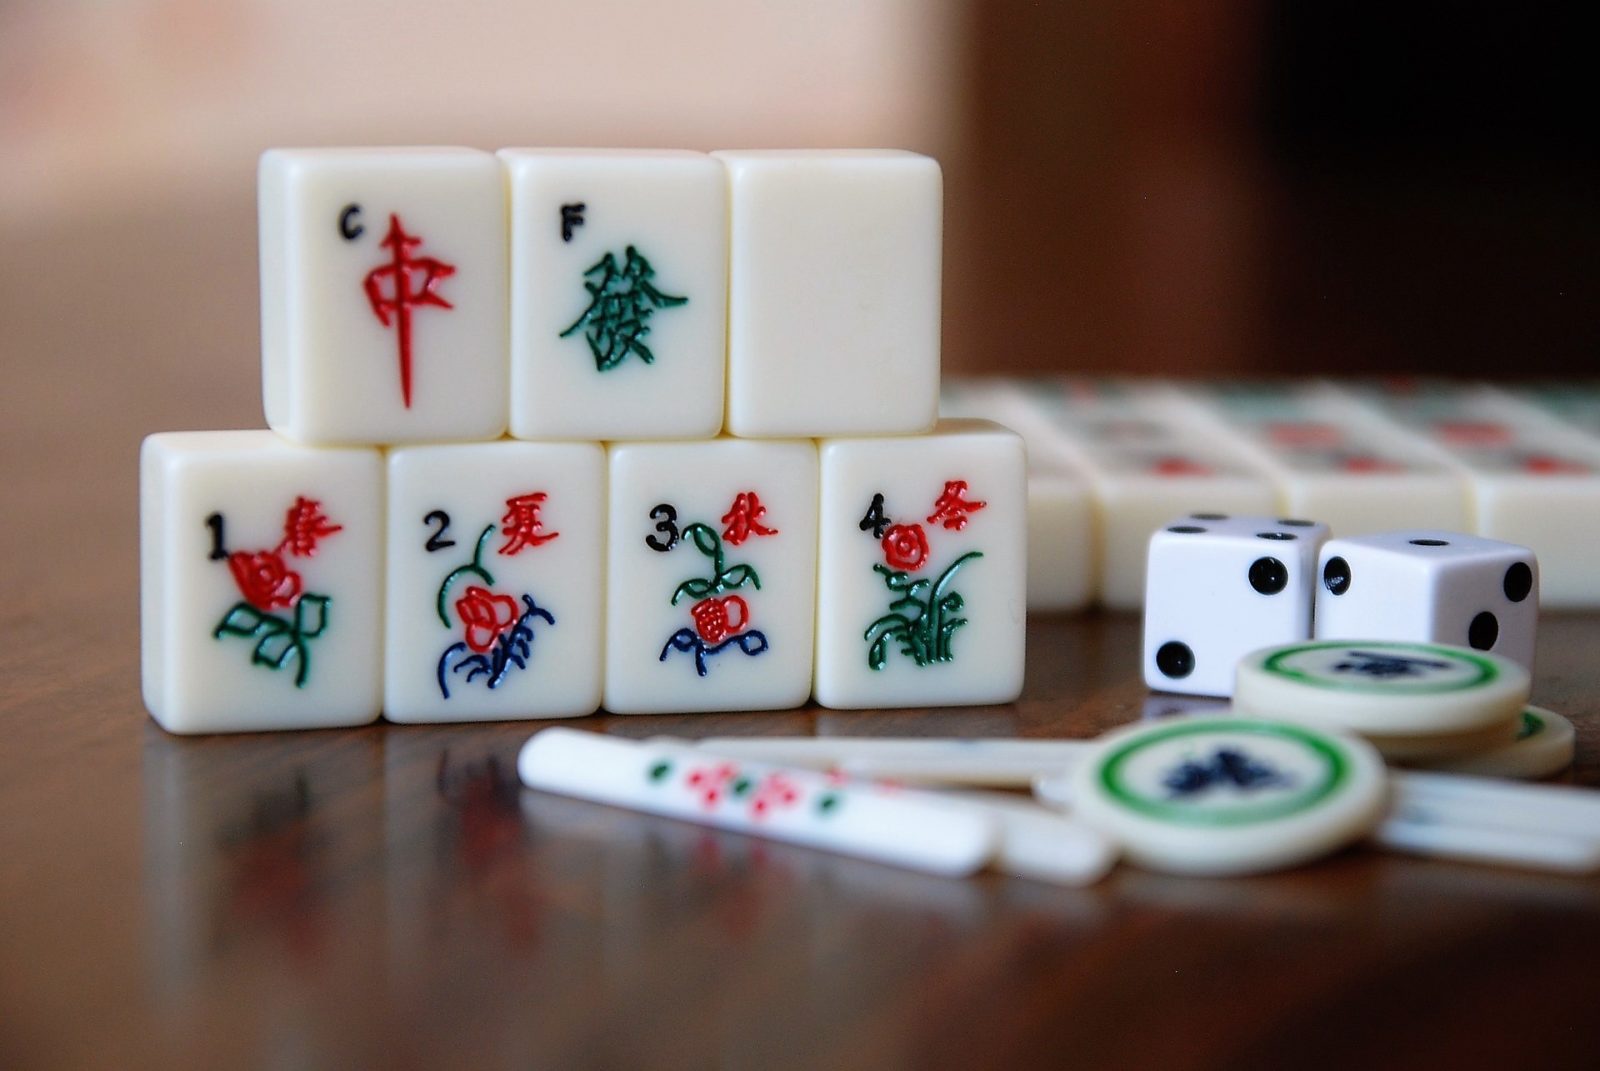 More than a game: Mastering Mahjong with AI and machine learning